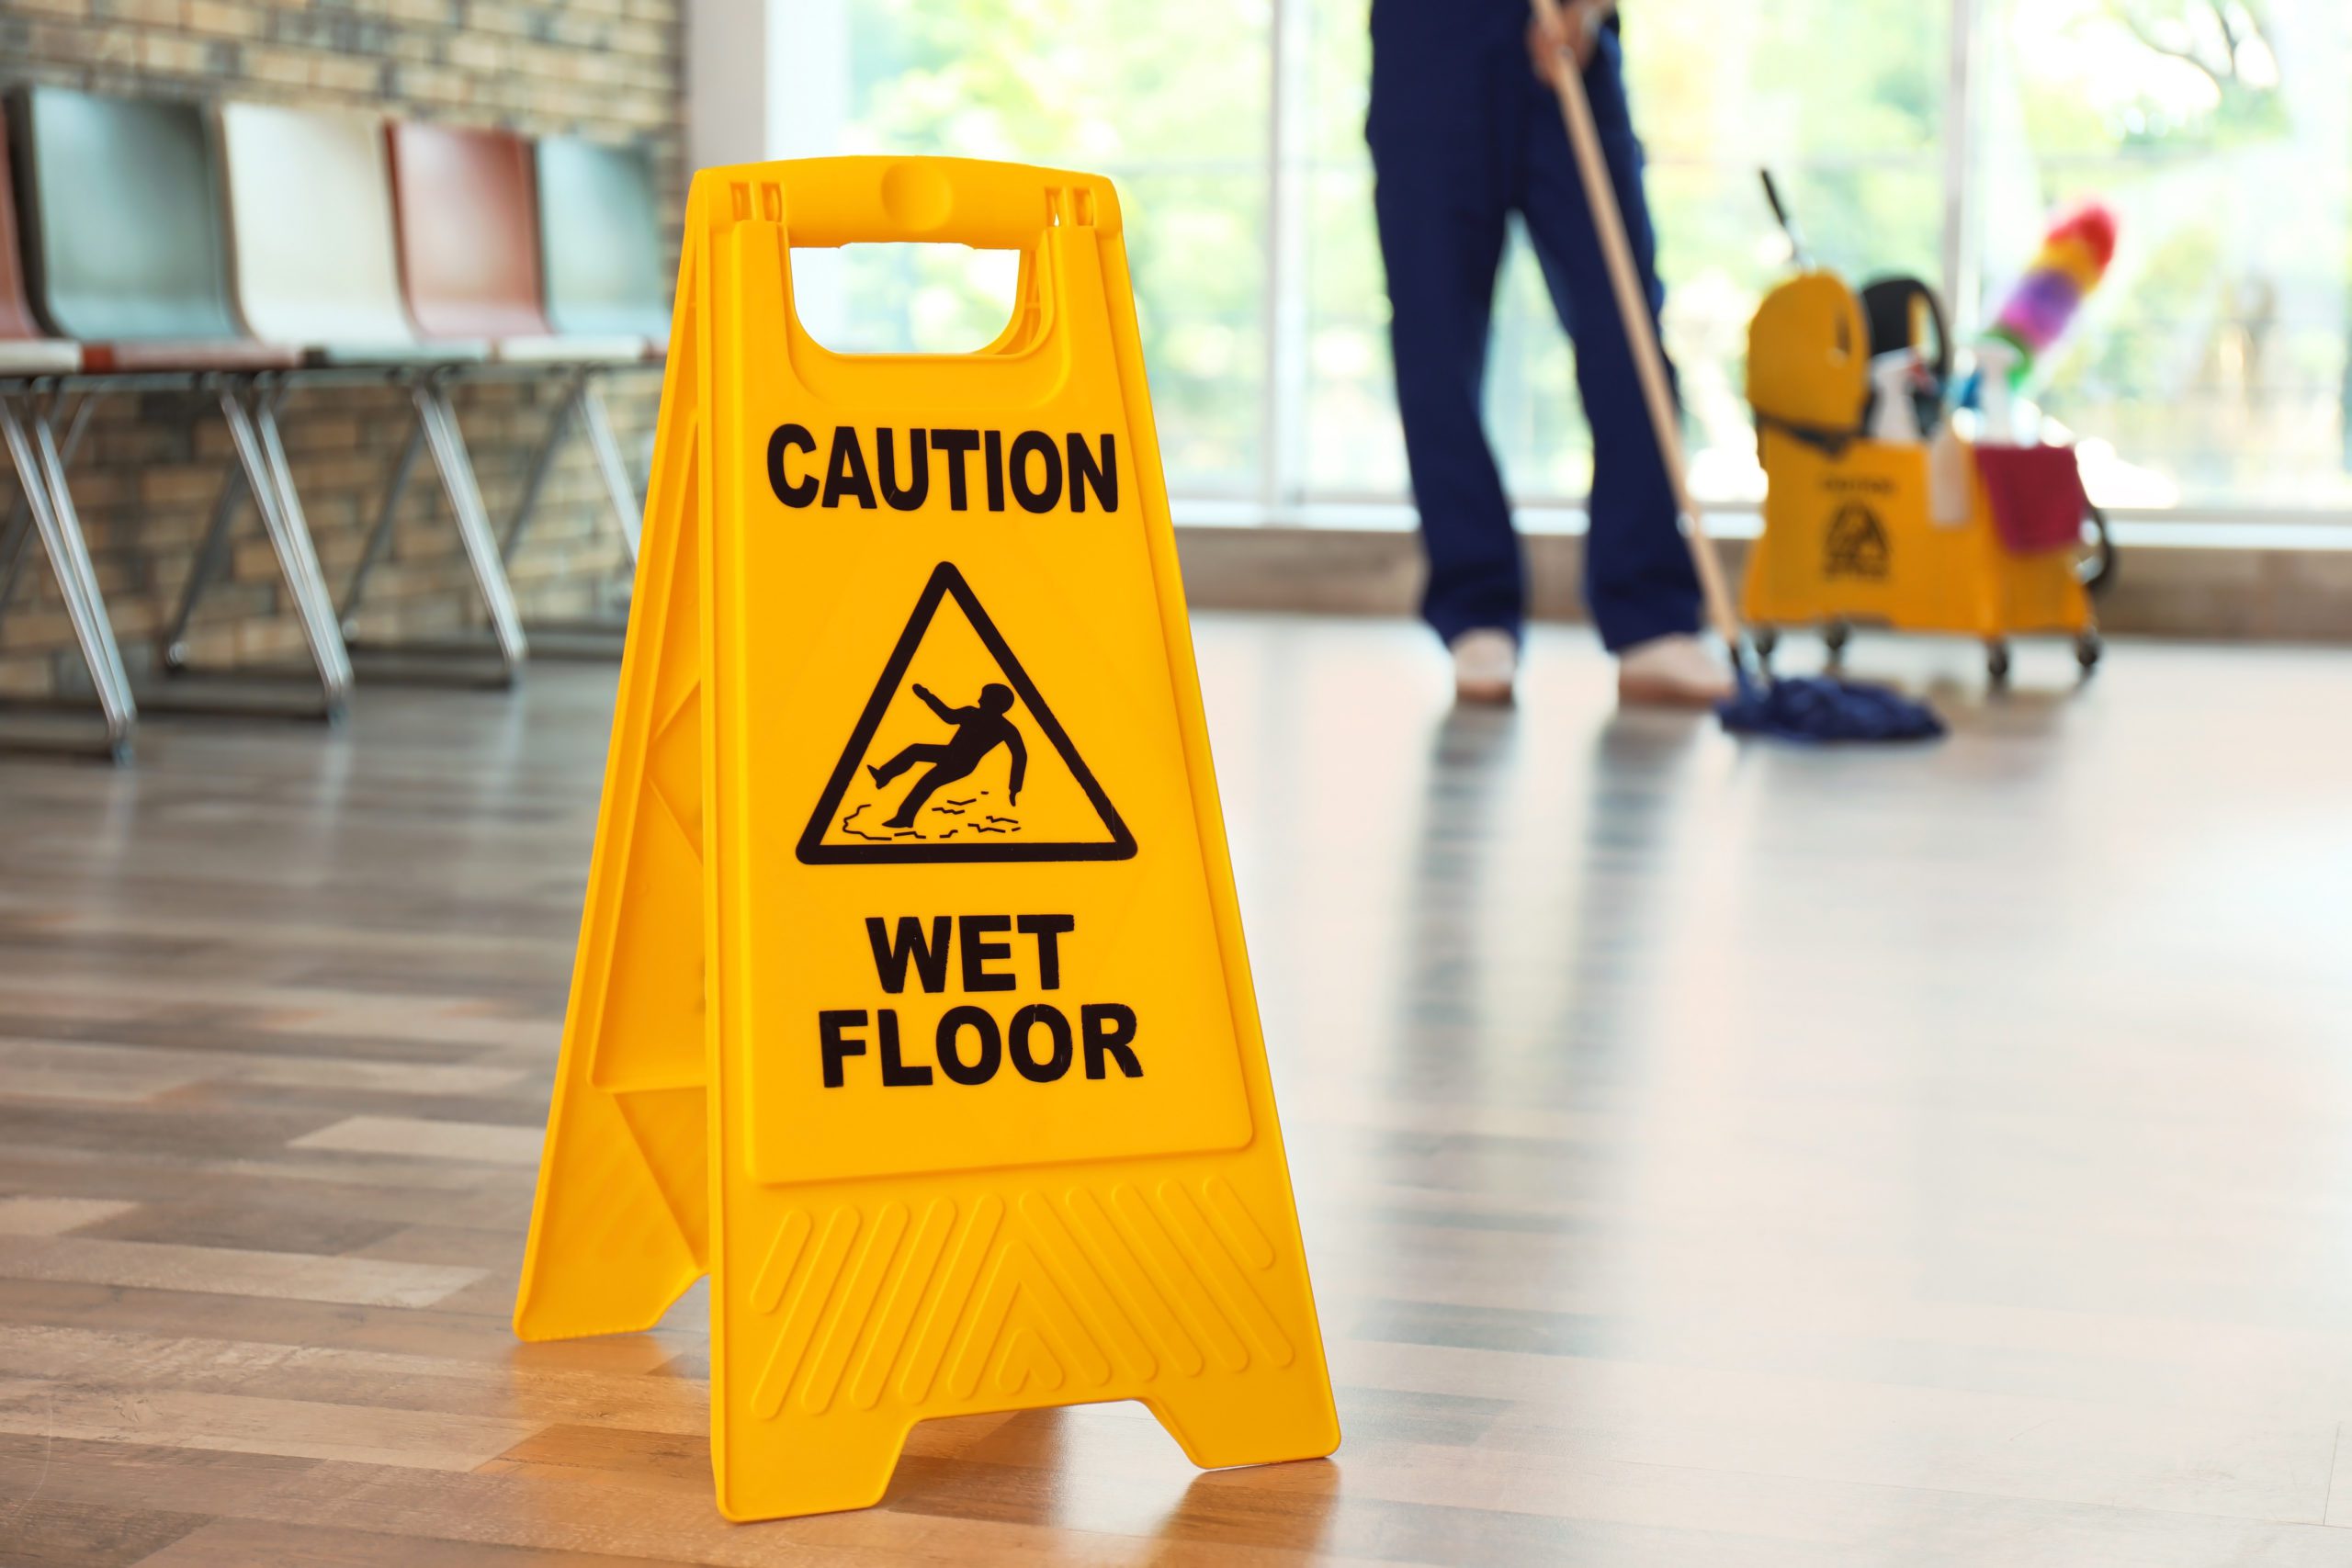 Reducing the Risk of Slips and Falls in the Workplace